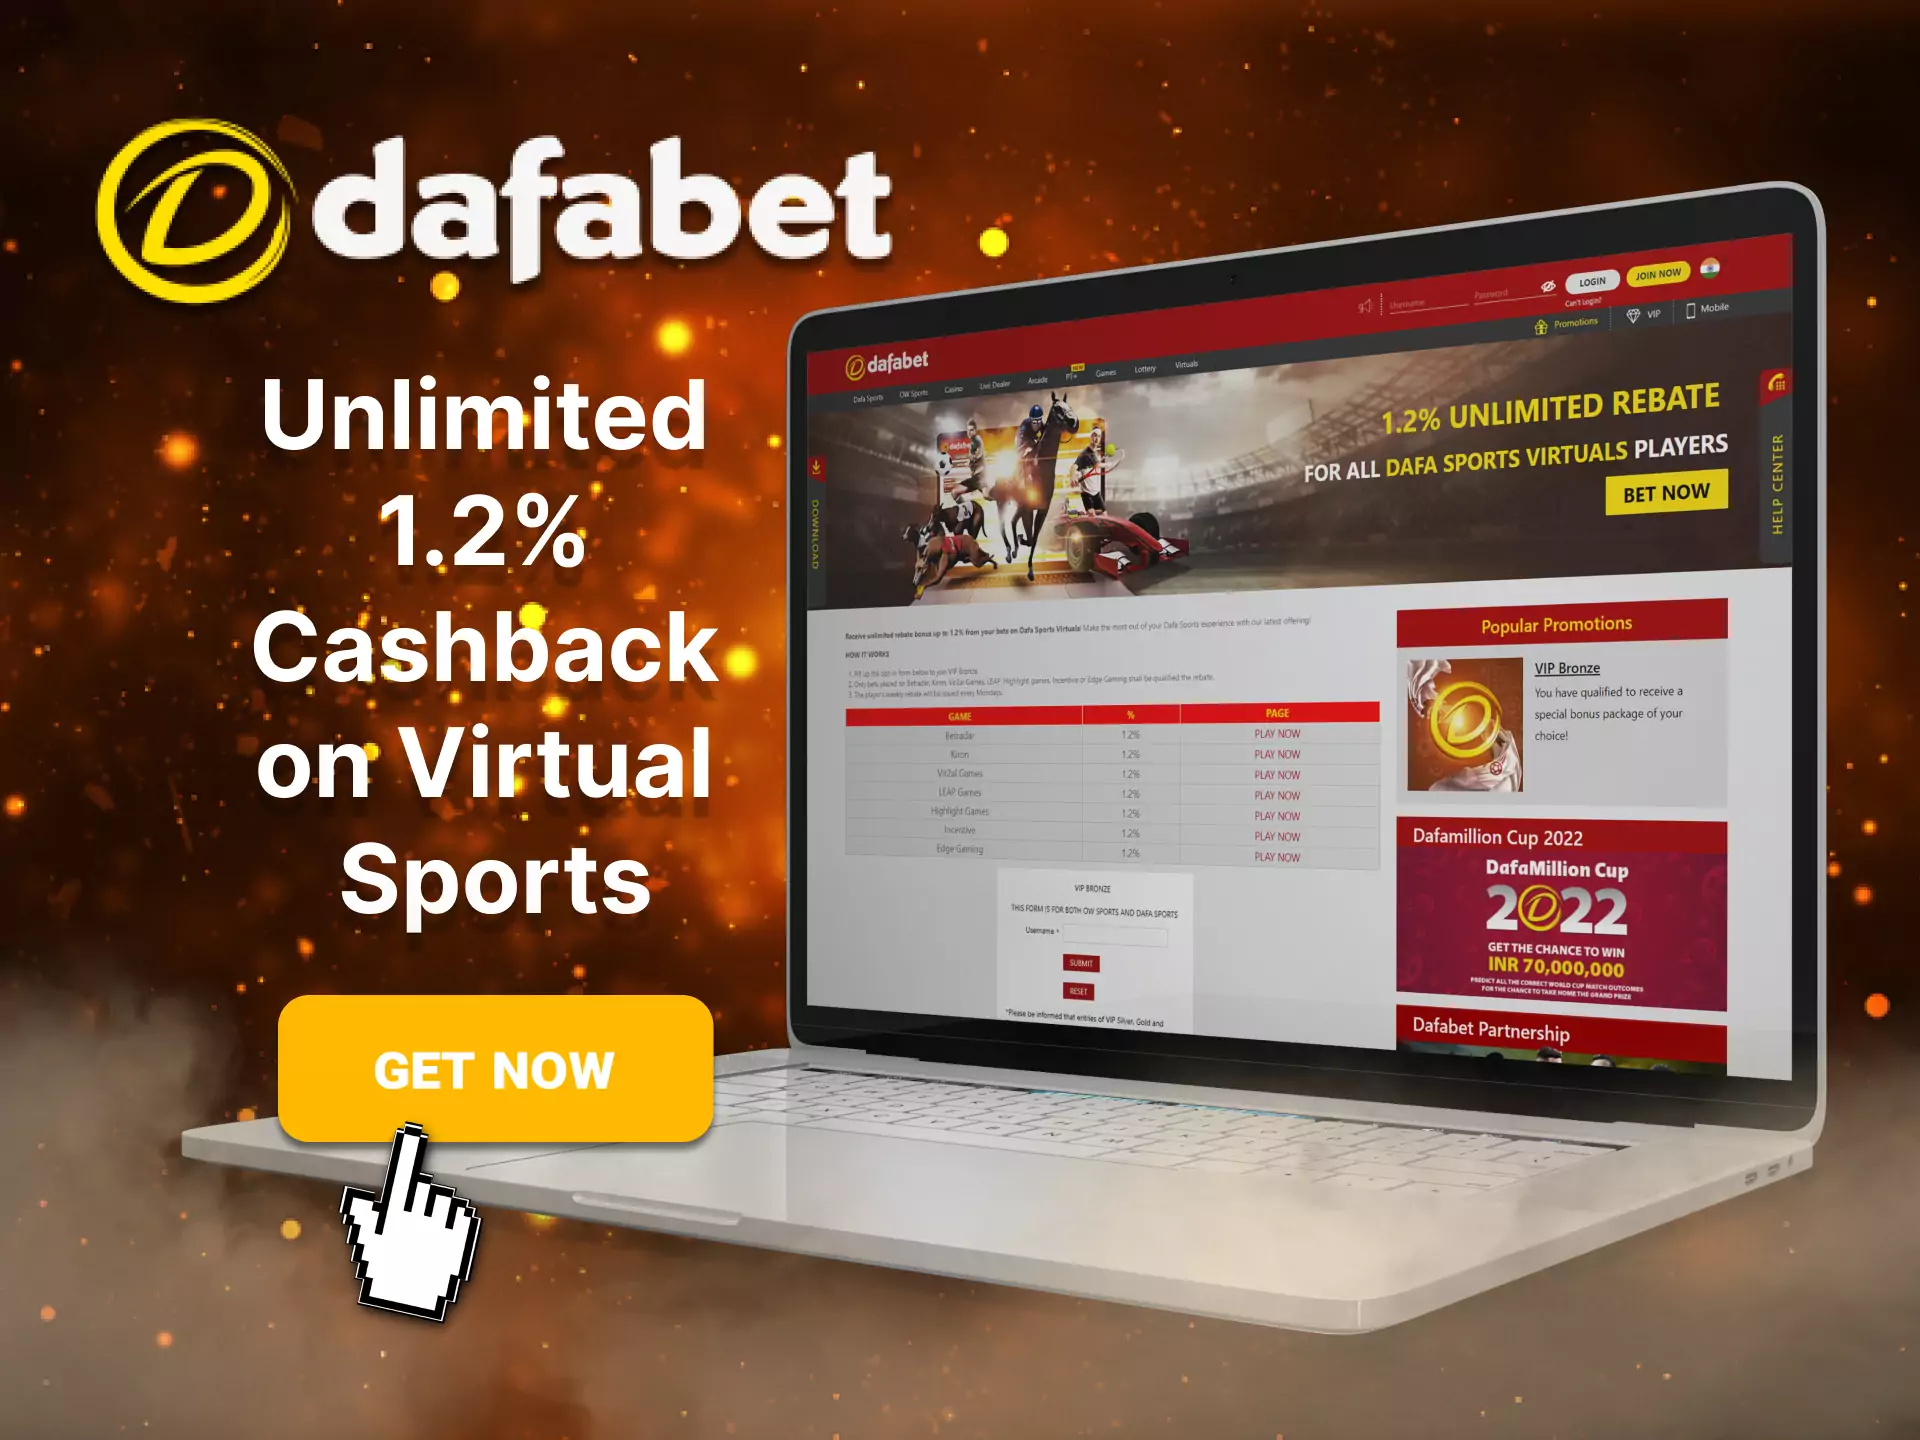 In Dafabet, use a special cashback bonus in virtual sports betting.